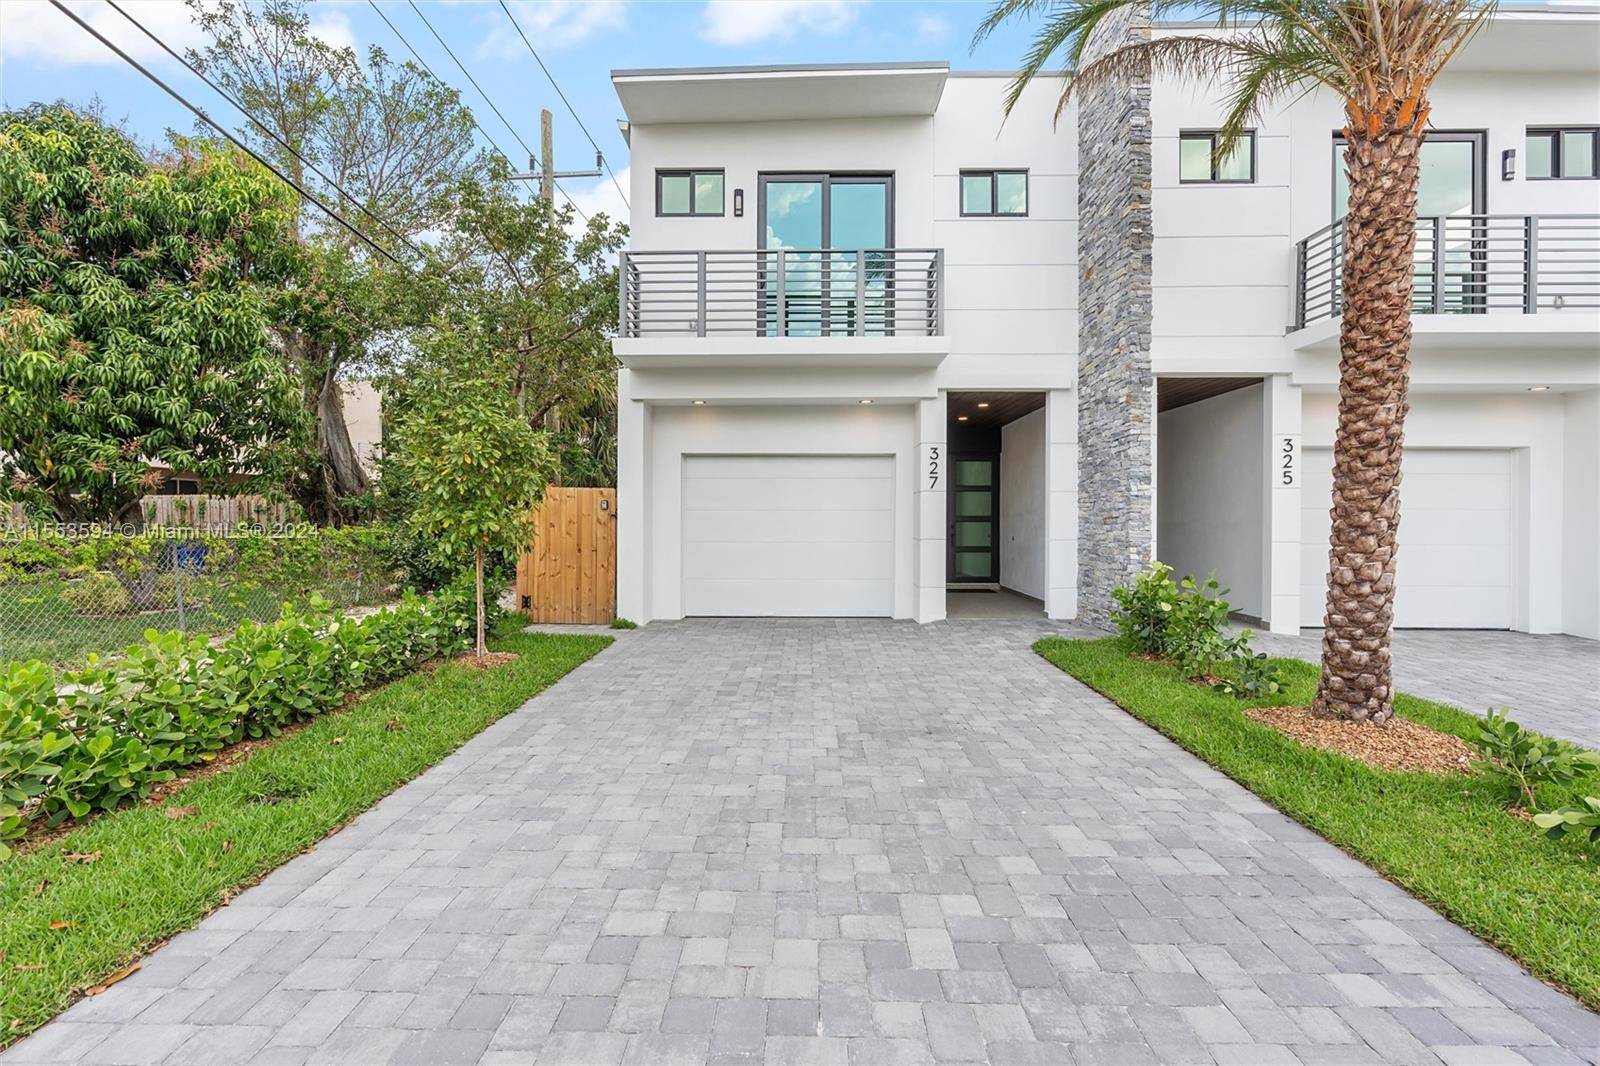 Experience luxury in this newly built townhouse in Fort Lauderdale.